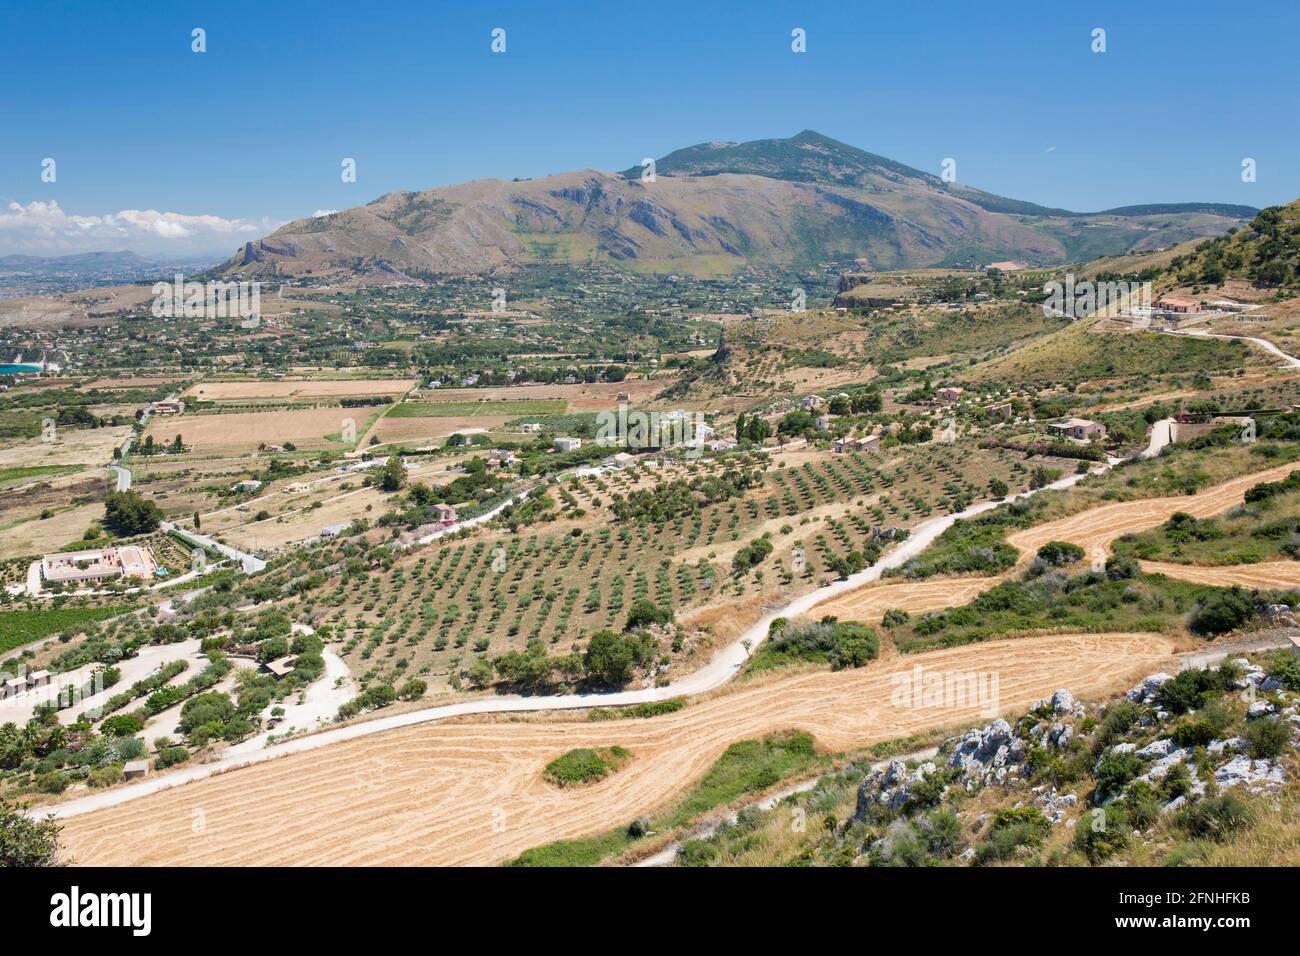 Scopello, Trapani, Sicily, Italy. View over typical agricultural landscape from the Torre Bennistra, Monte Inici in background. Stock Photo